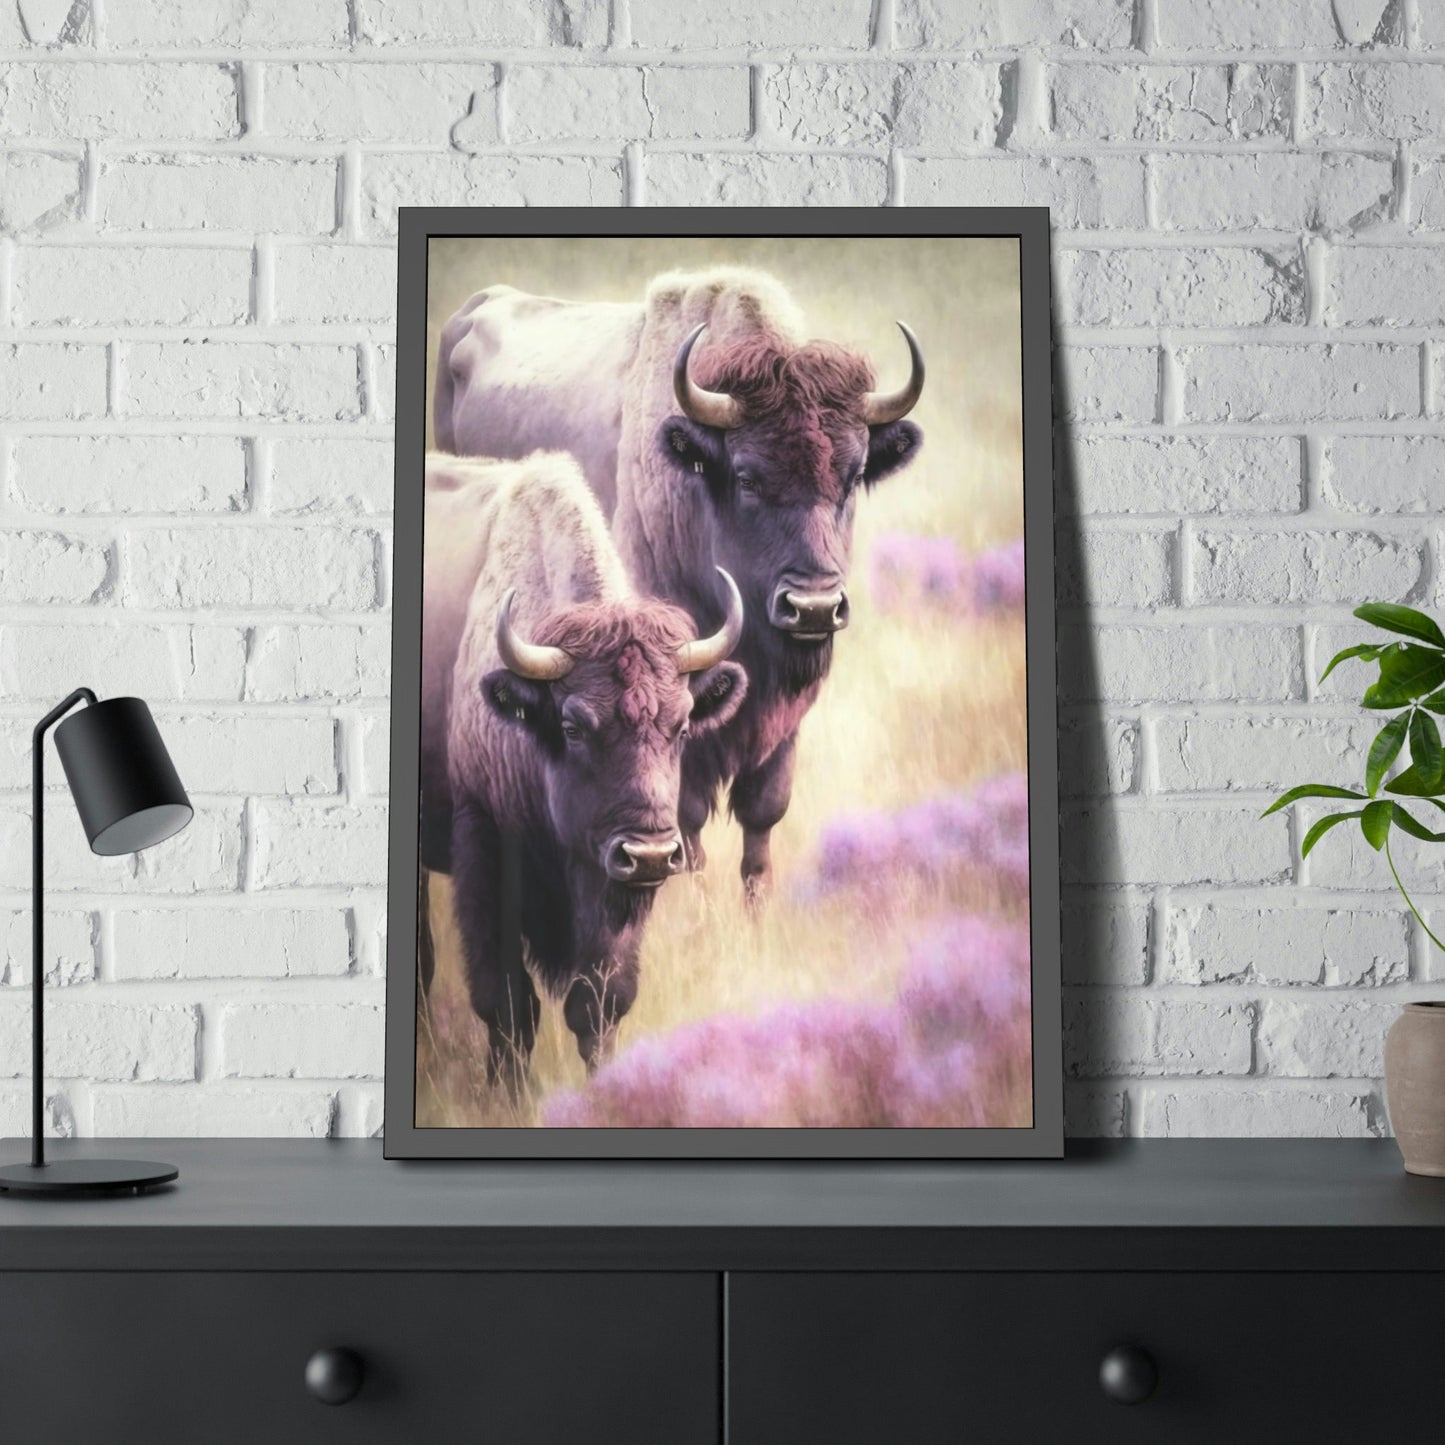 The Bison's Power: A Natural Canvas & Poster Painting of a Bisons at Its Prime